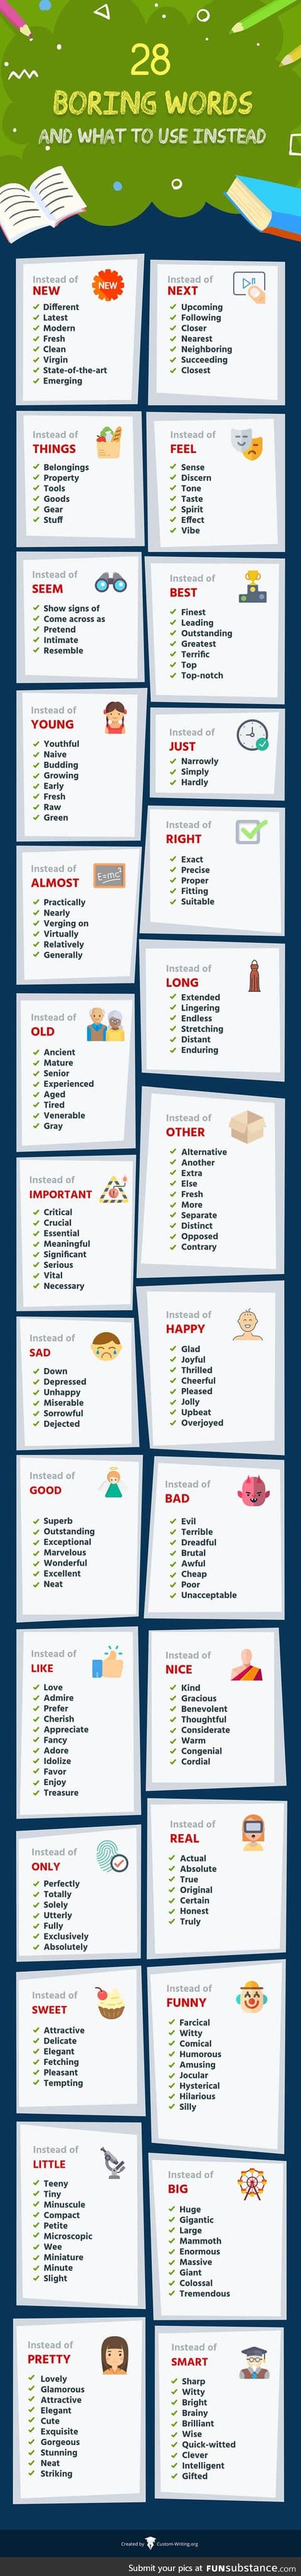 A comprehensive list of boring words and what to use instead!